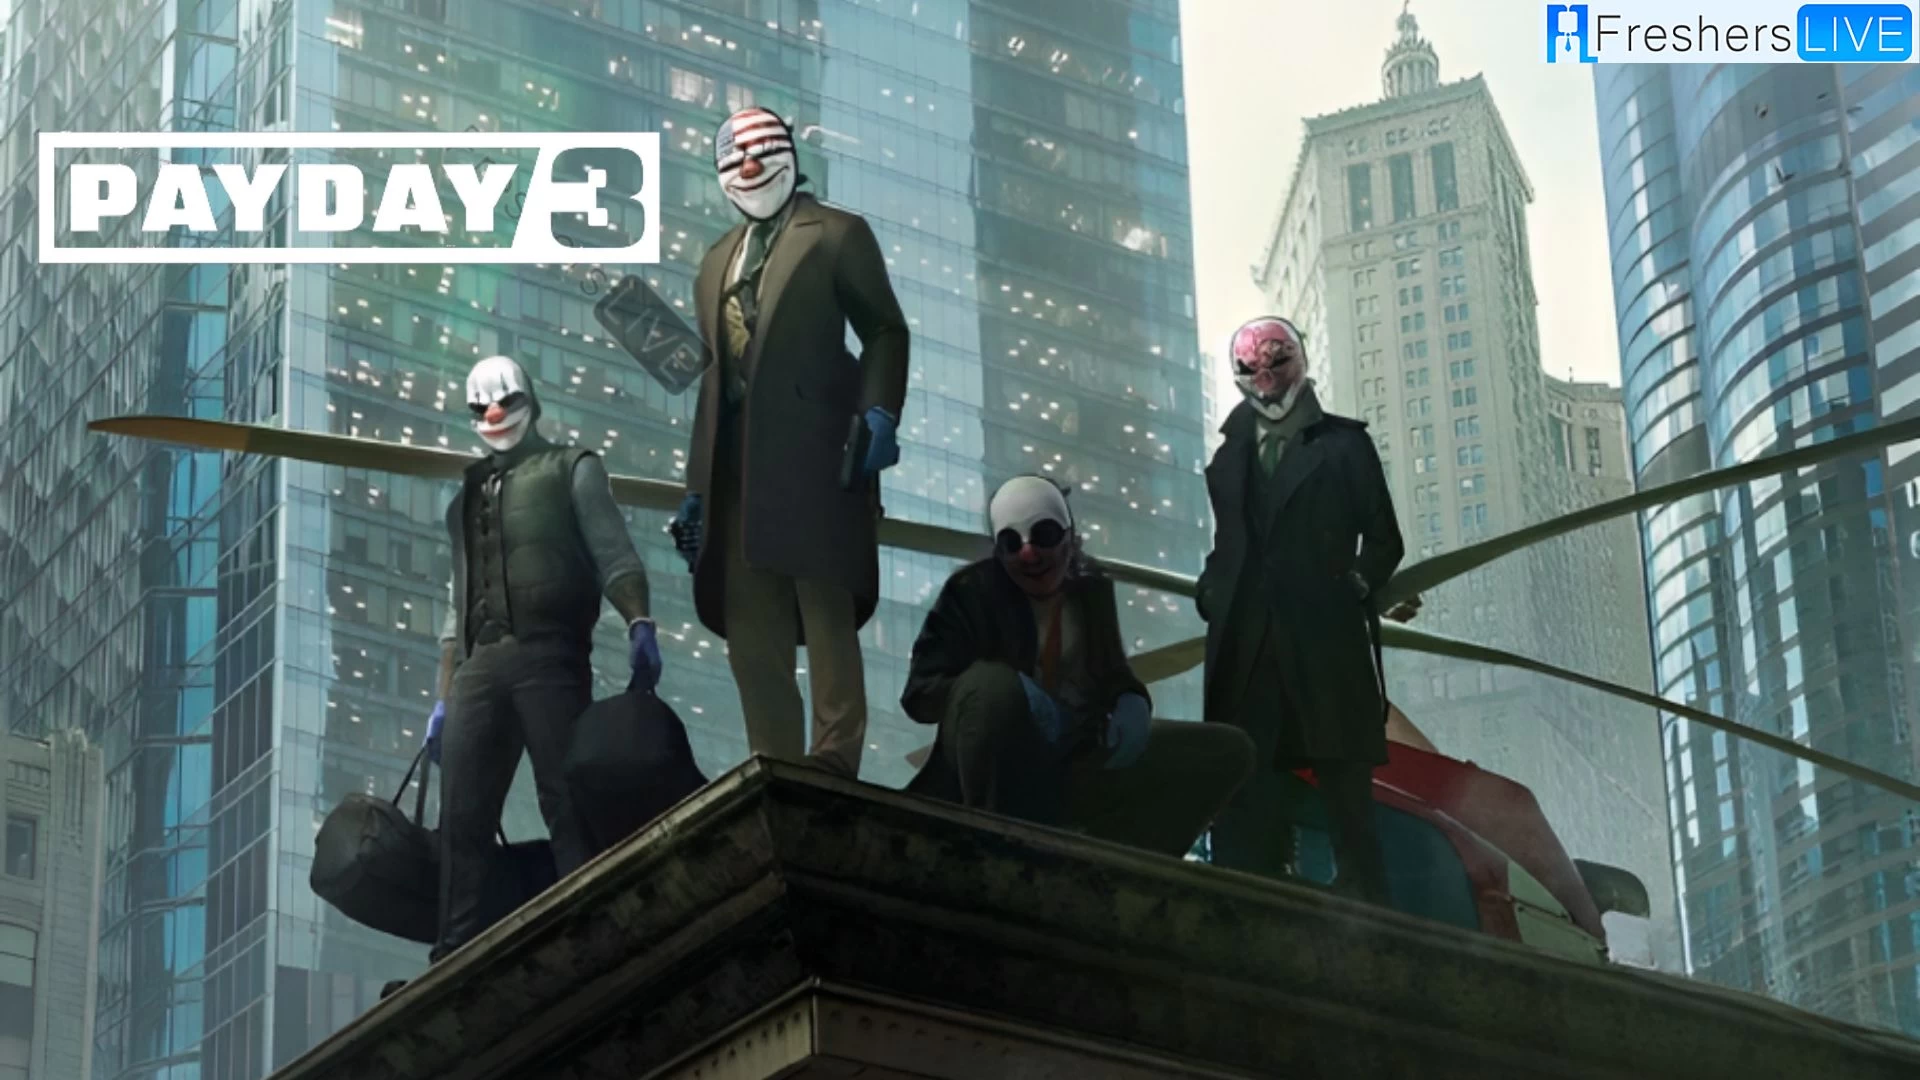 Is Payday 3 Multiplayer? How to Play With Friends in Payday 3?